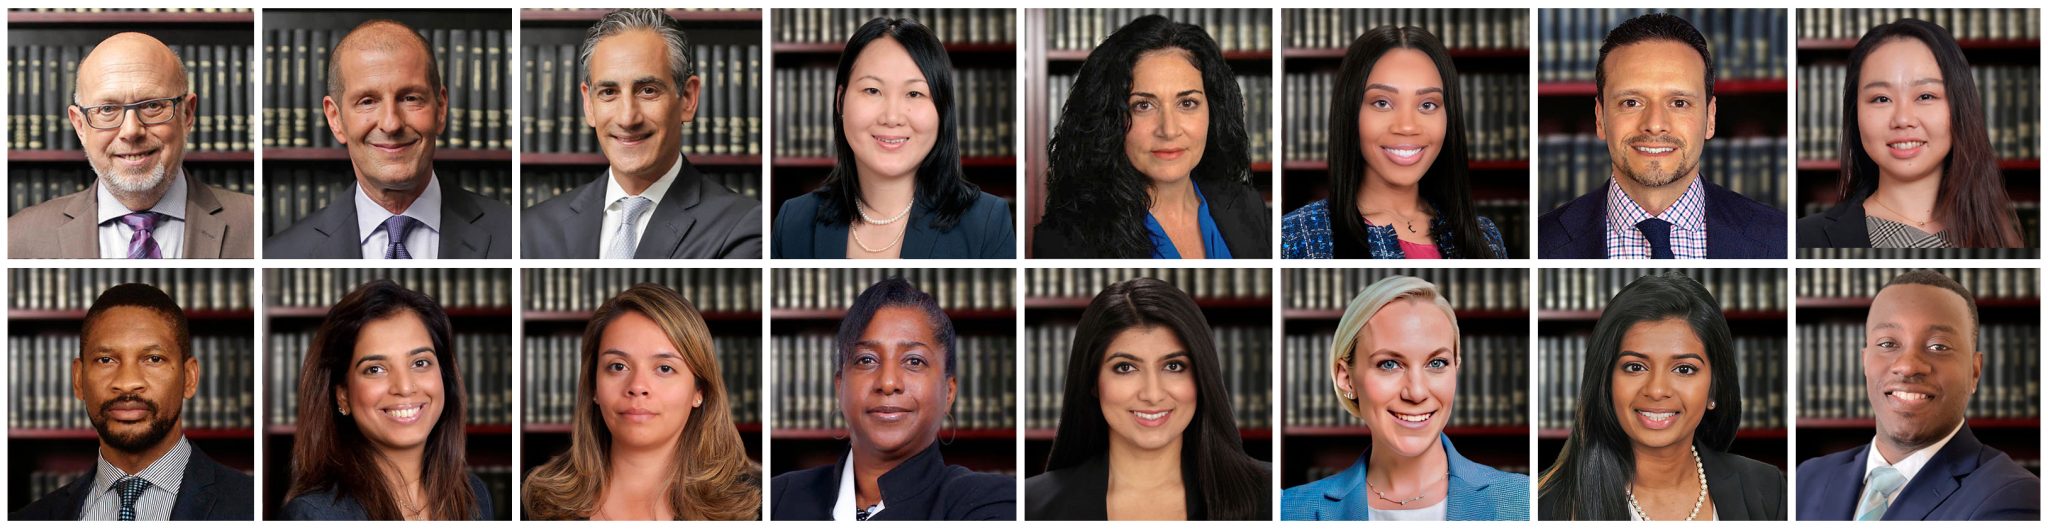 PMT Law Firm - Diversity and Inclusion